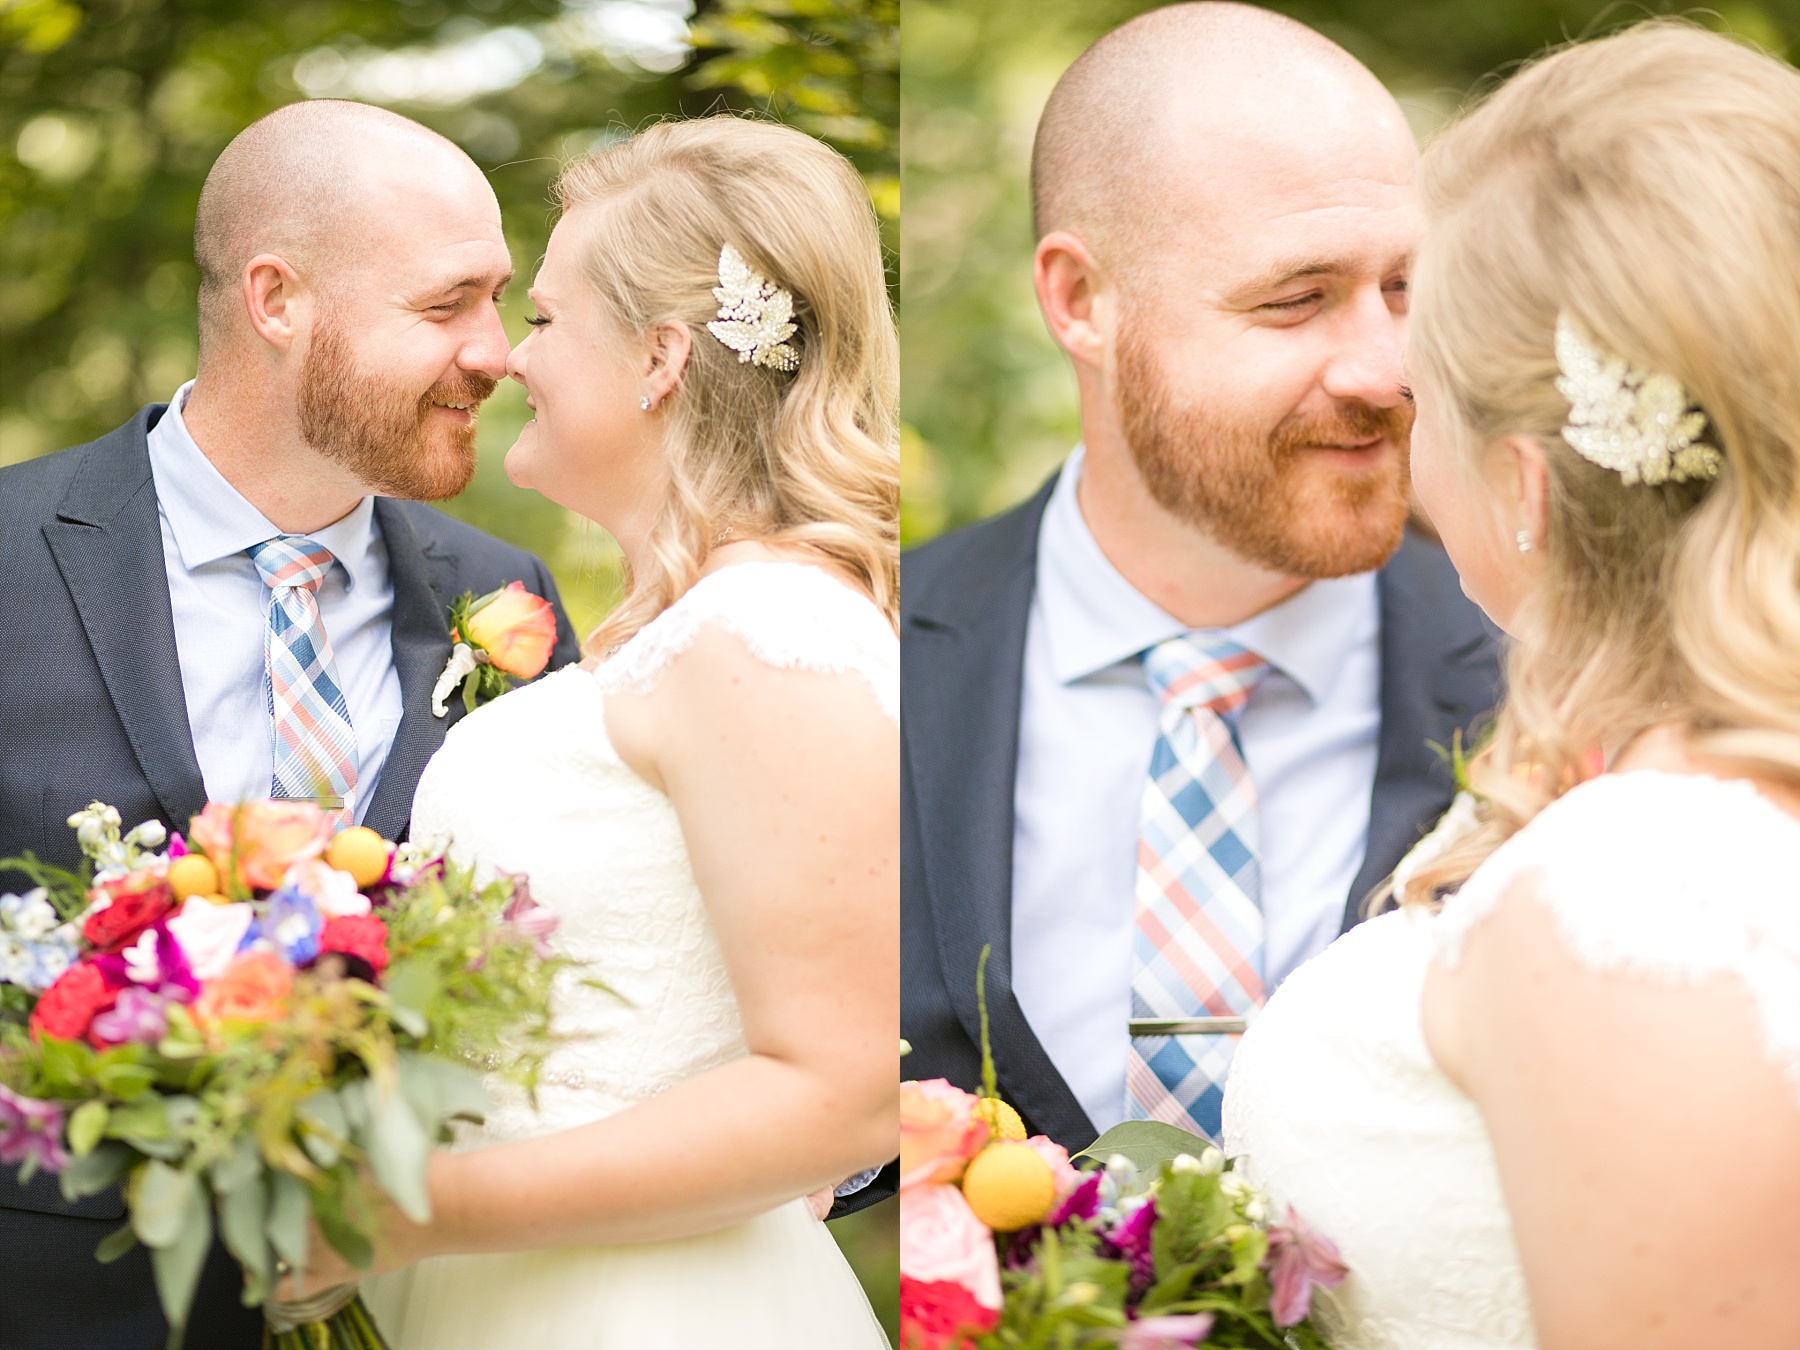 An intimate backyard wedding with little flecks of golden light shining through the trees, and so much laughter, joy and the good kind of tears made for a beautiful fete for Amber & Glenn.